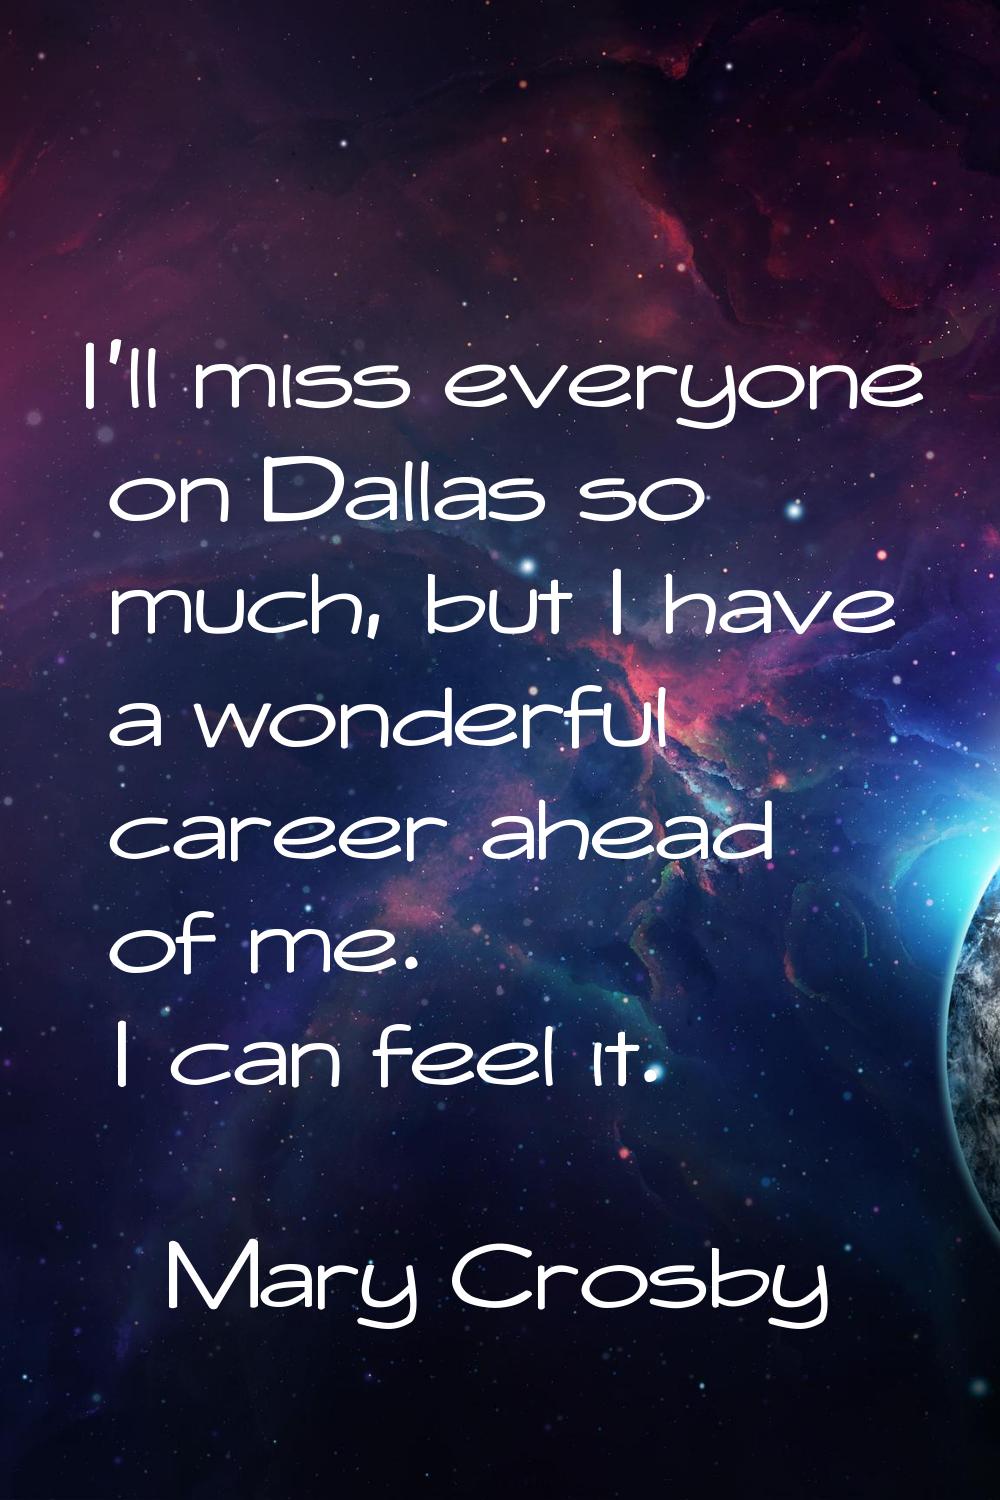 I'll miss everyone on Dallas so much, but I have a wonderful career ahead of me. I can feel it.